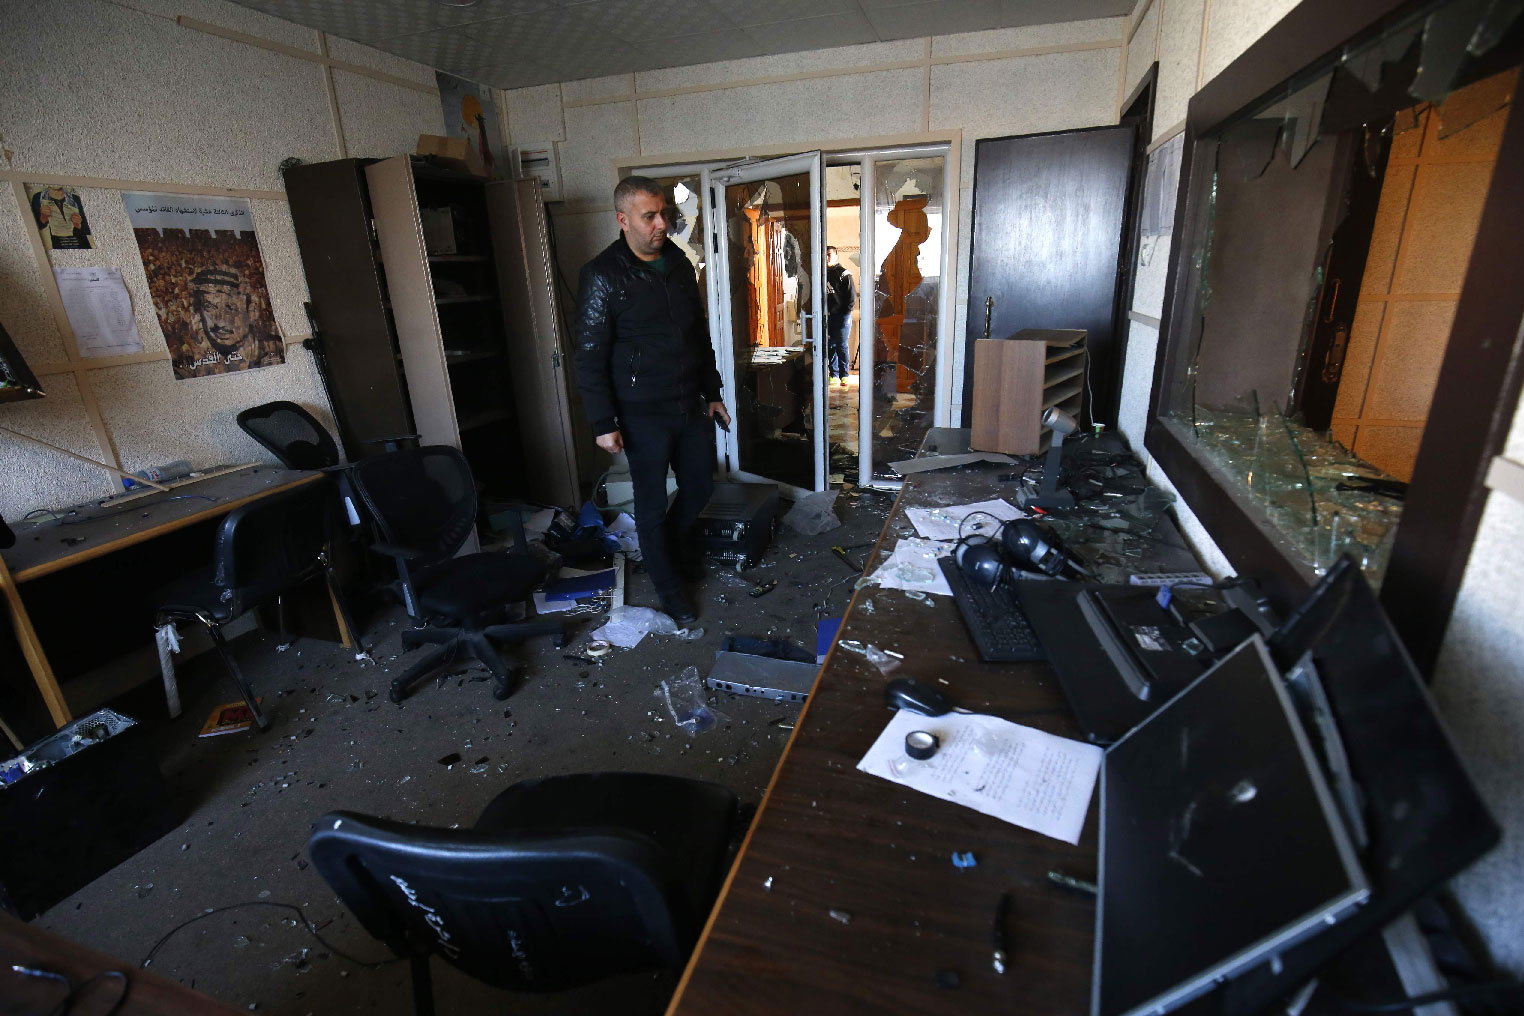 An employee of the Palestinian government-run radio and television stations inspects the damage at one of the studios on January 4, 2019, after armed men reportedly raided the building in Gaza City.